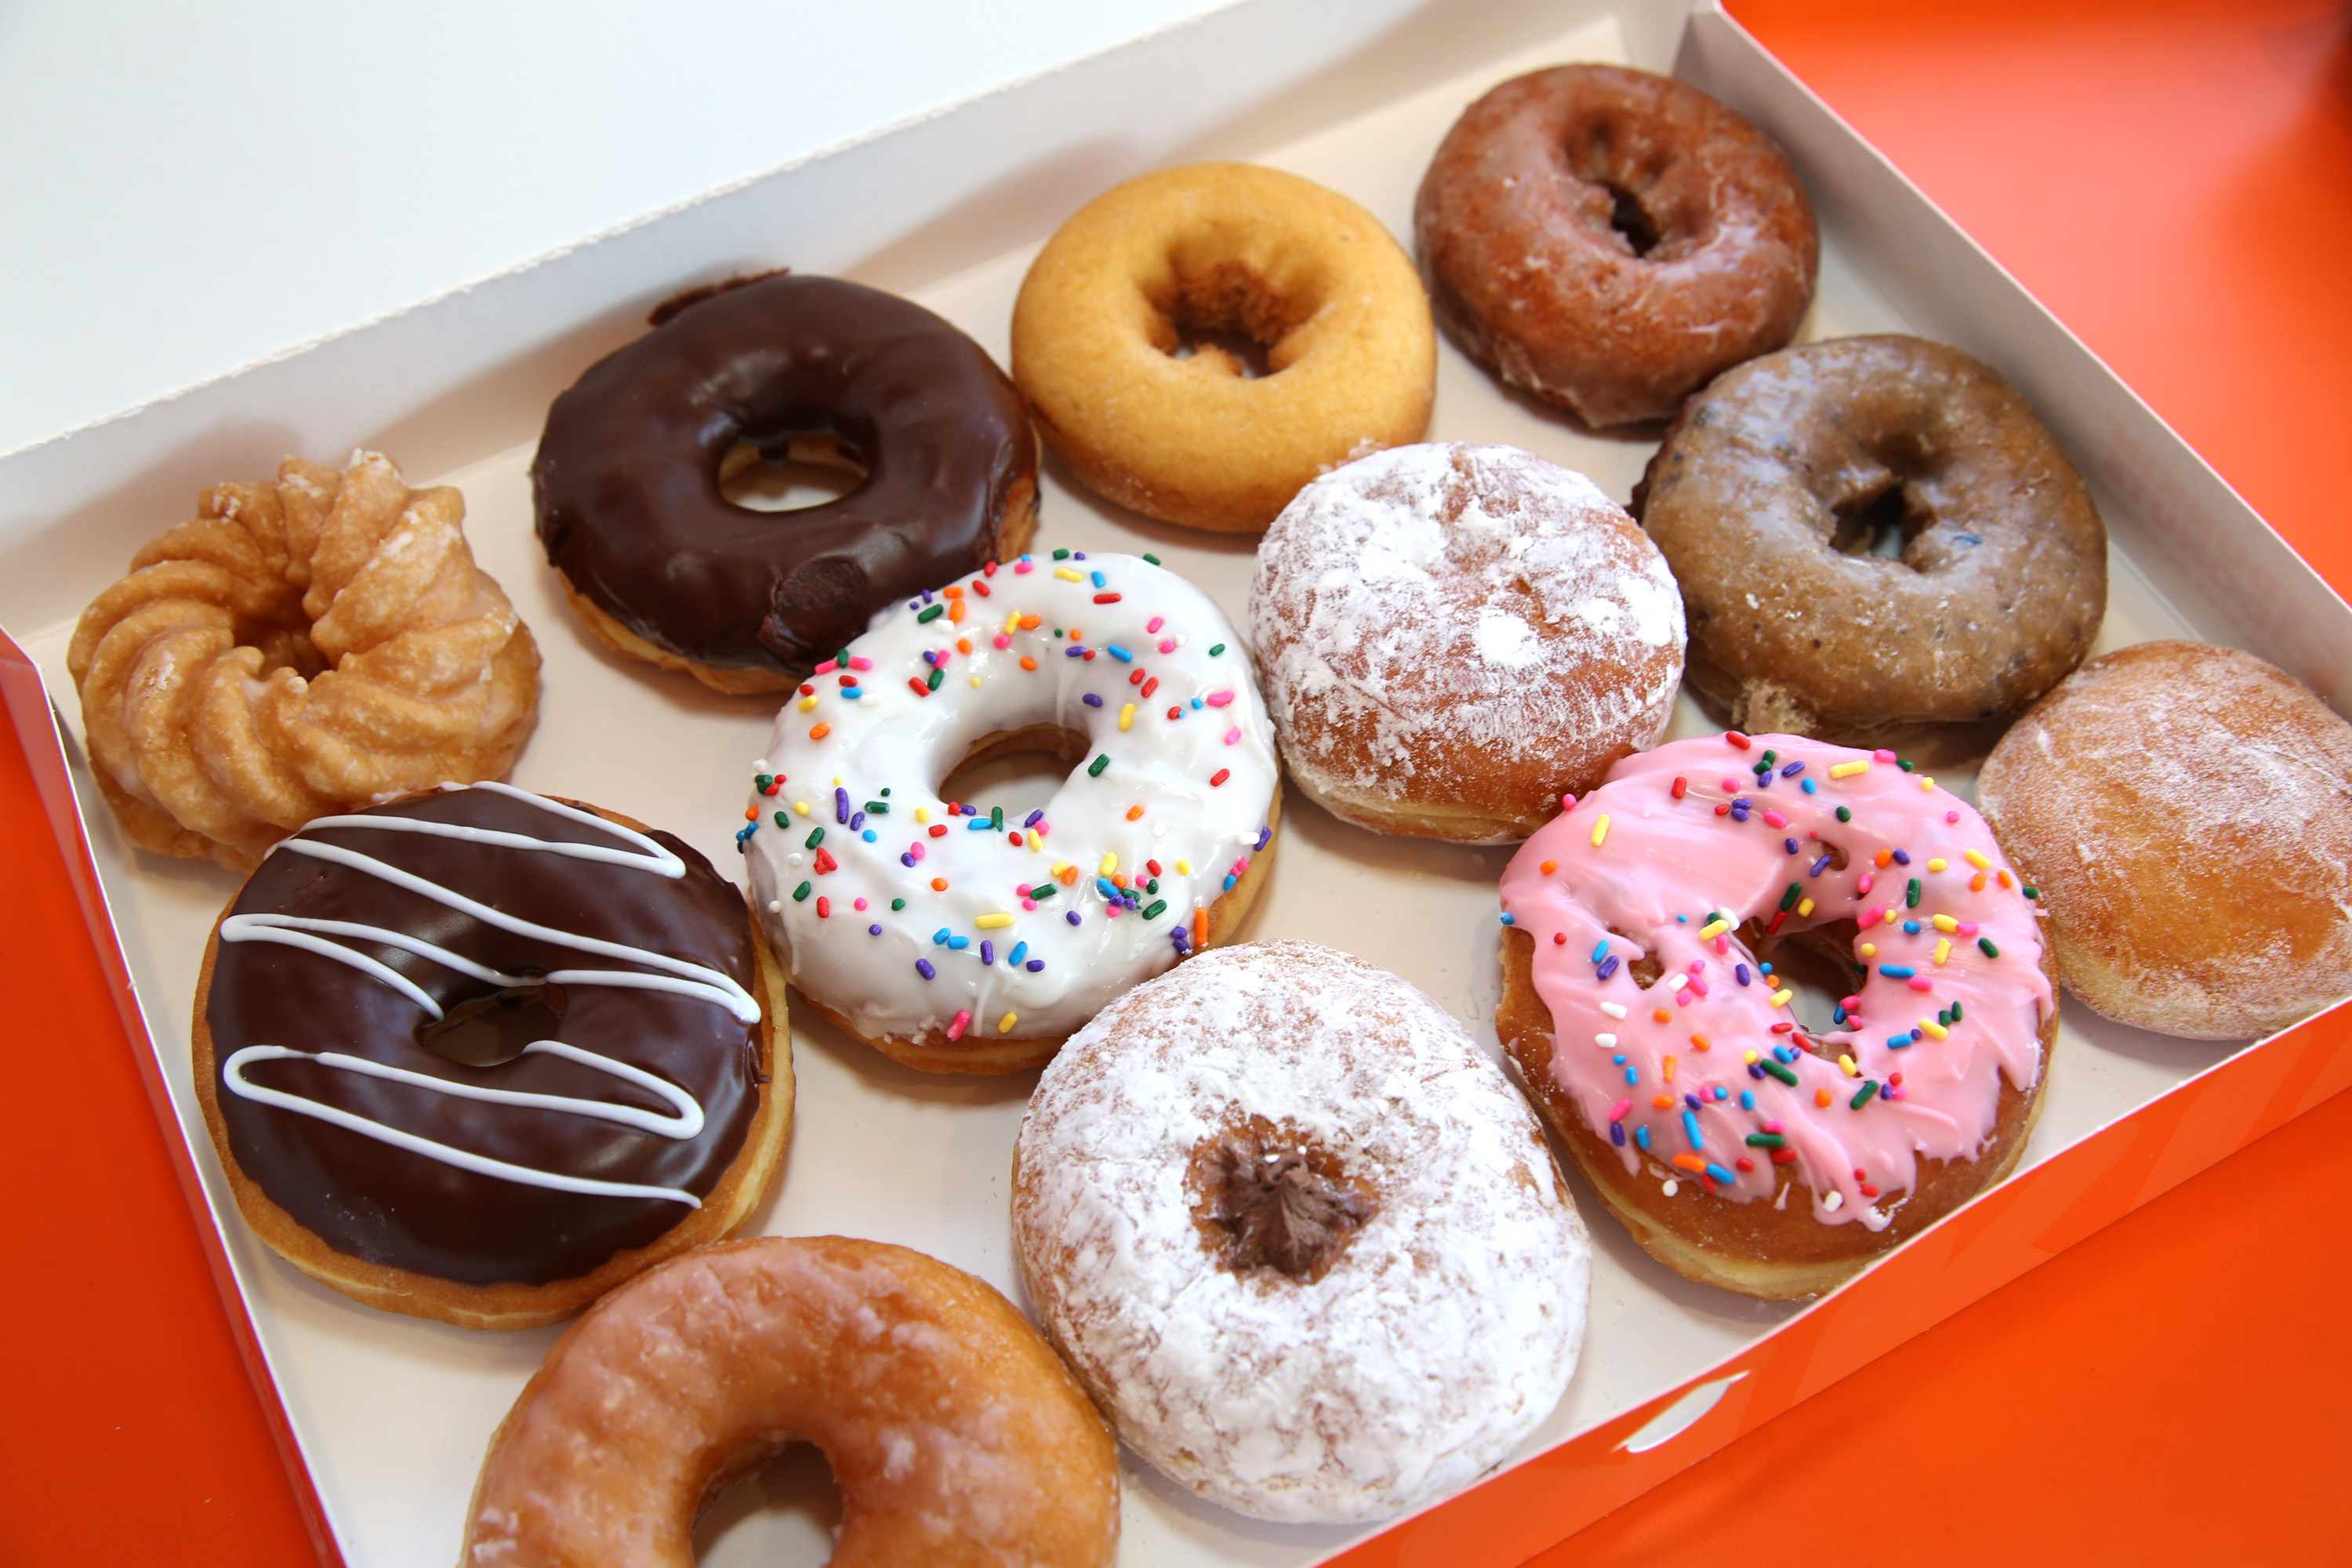 Dunkin' Donuts gives free donuts to nurses for National Nurses Week